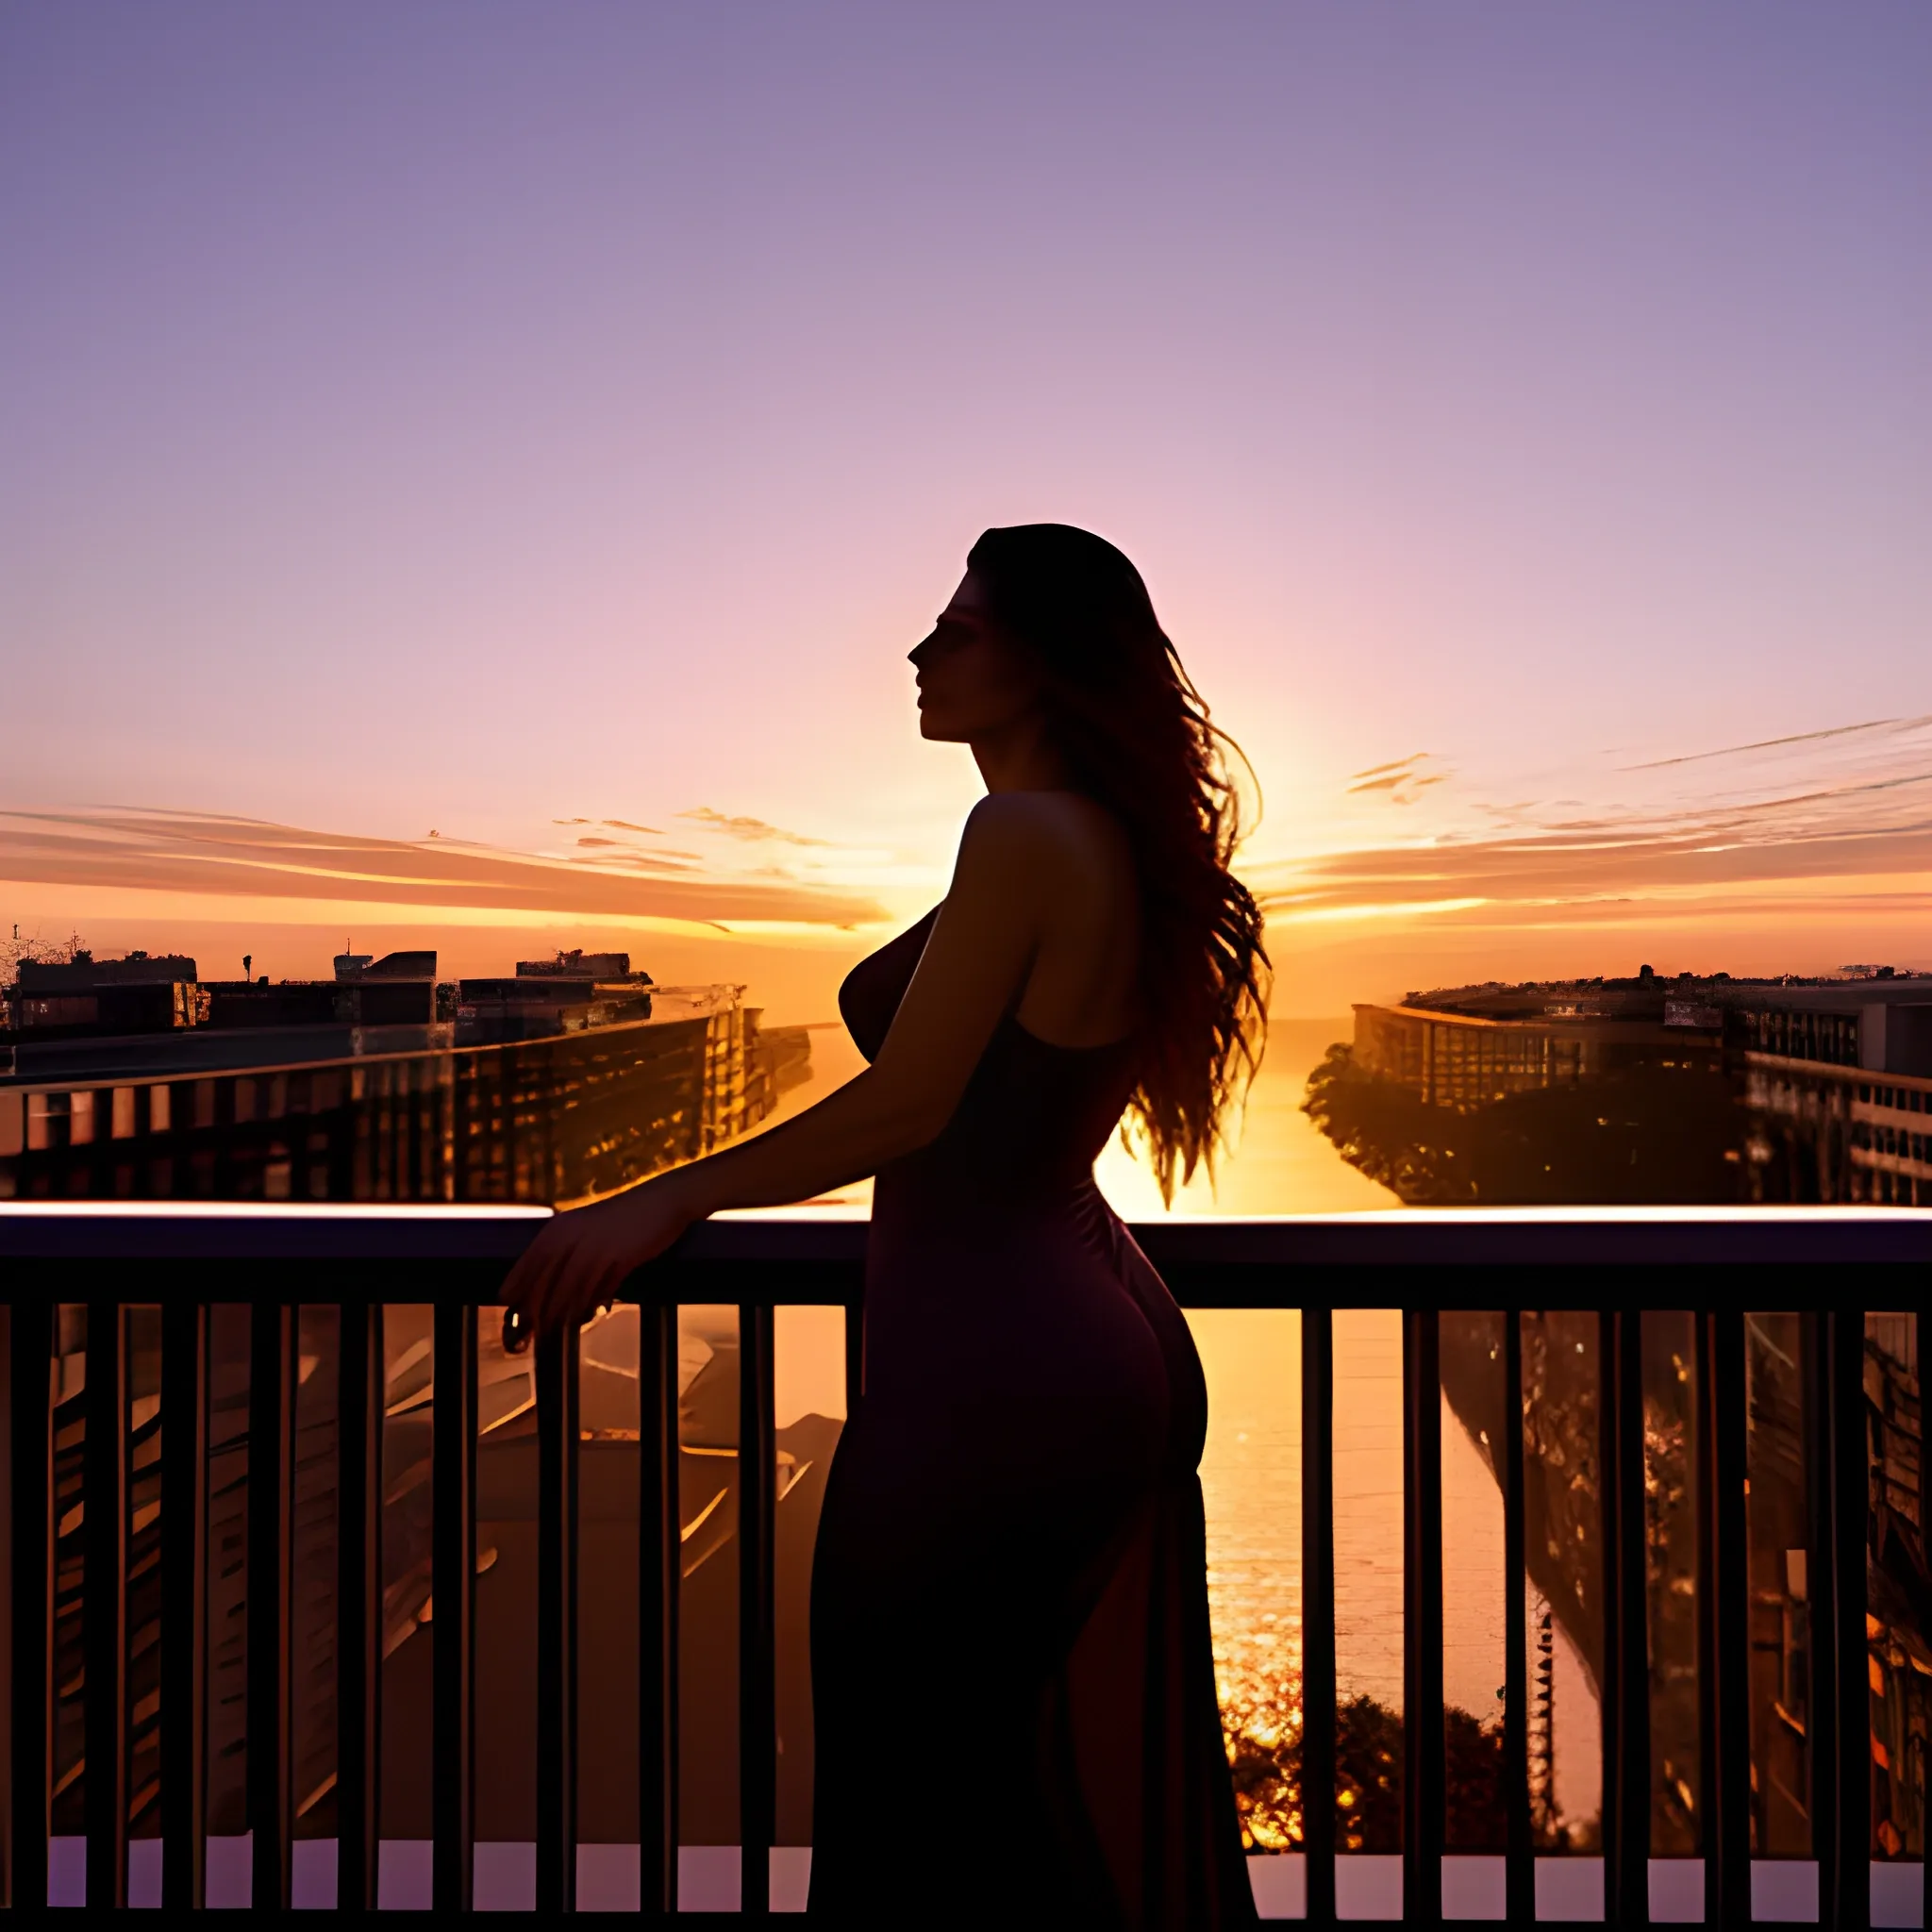 Using natural light just after sunset, photograph the silhouette of the girl at her balcony railing, gazing out at the last rays of the setting sun. Her slender limbs and flowing nightgown are backlit while her long hair floats around her shoulders in the breeze.